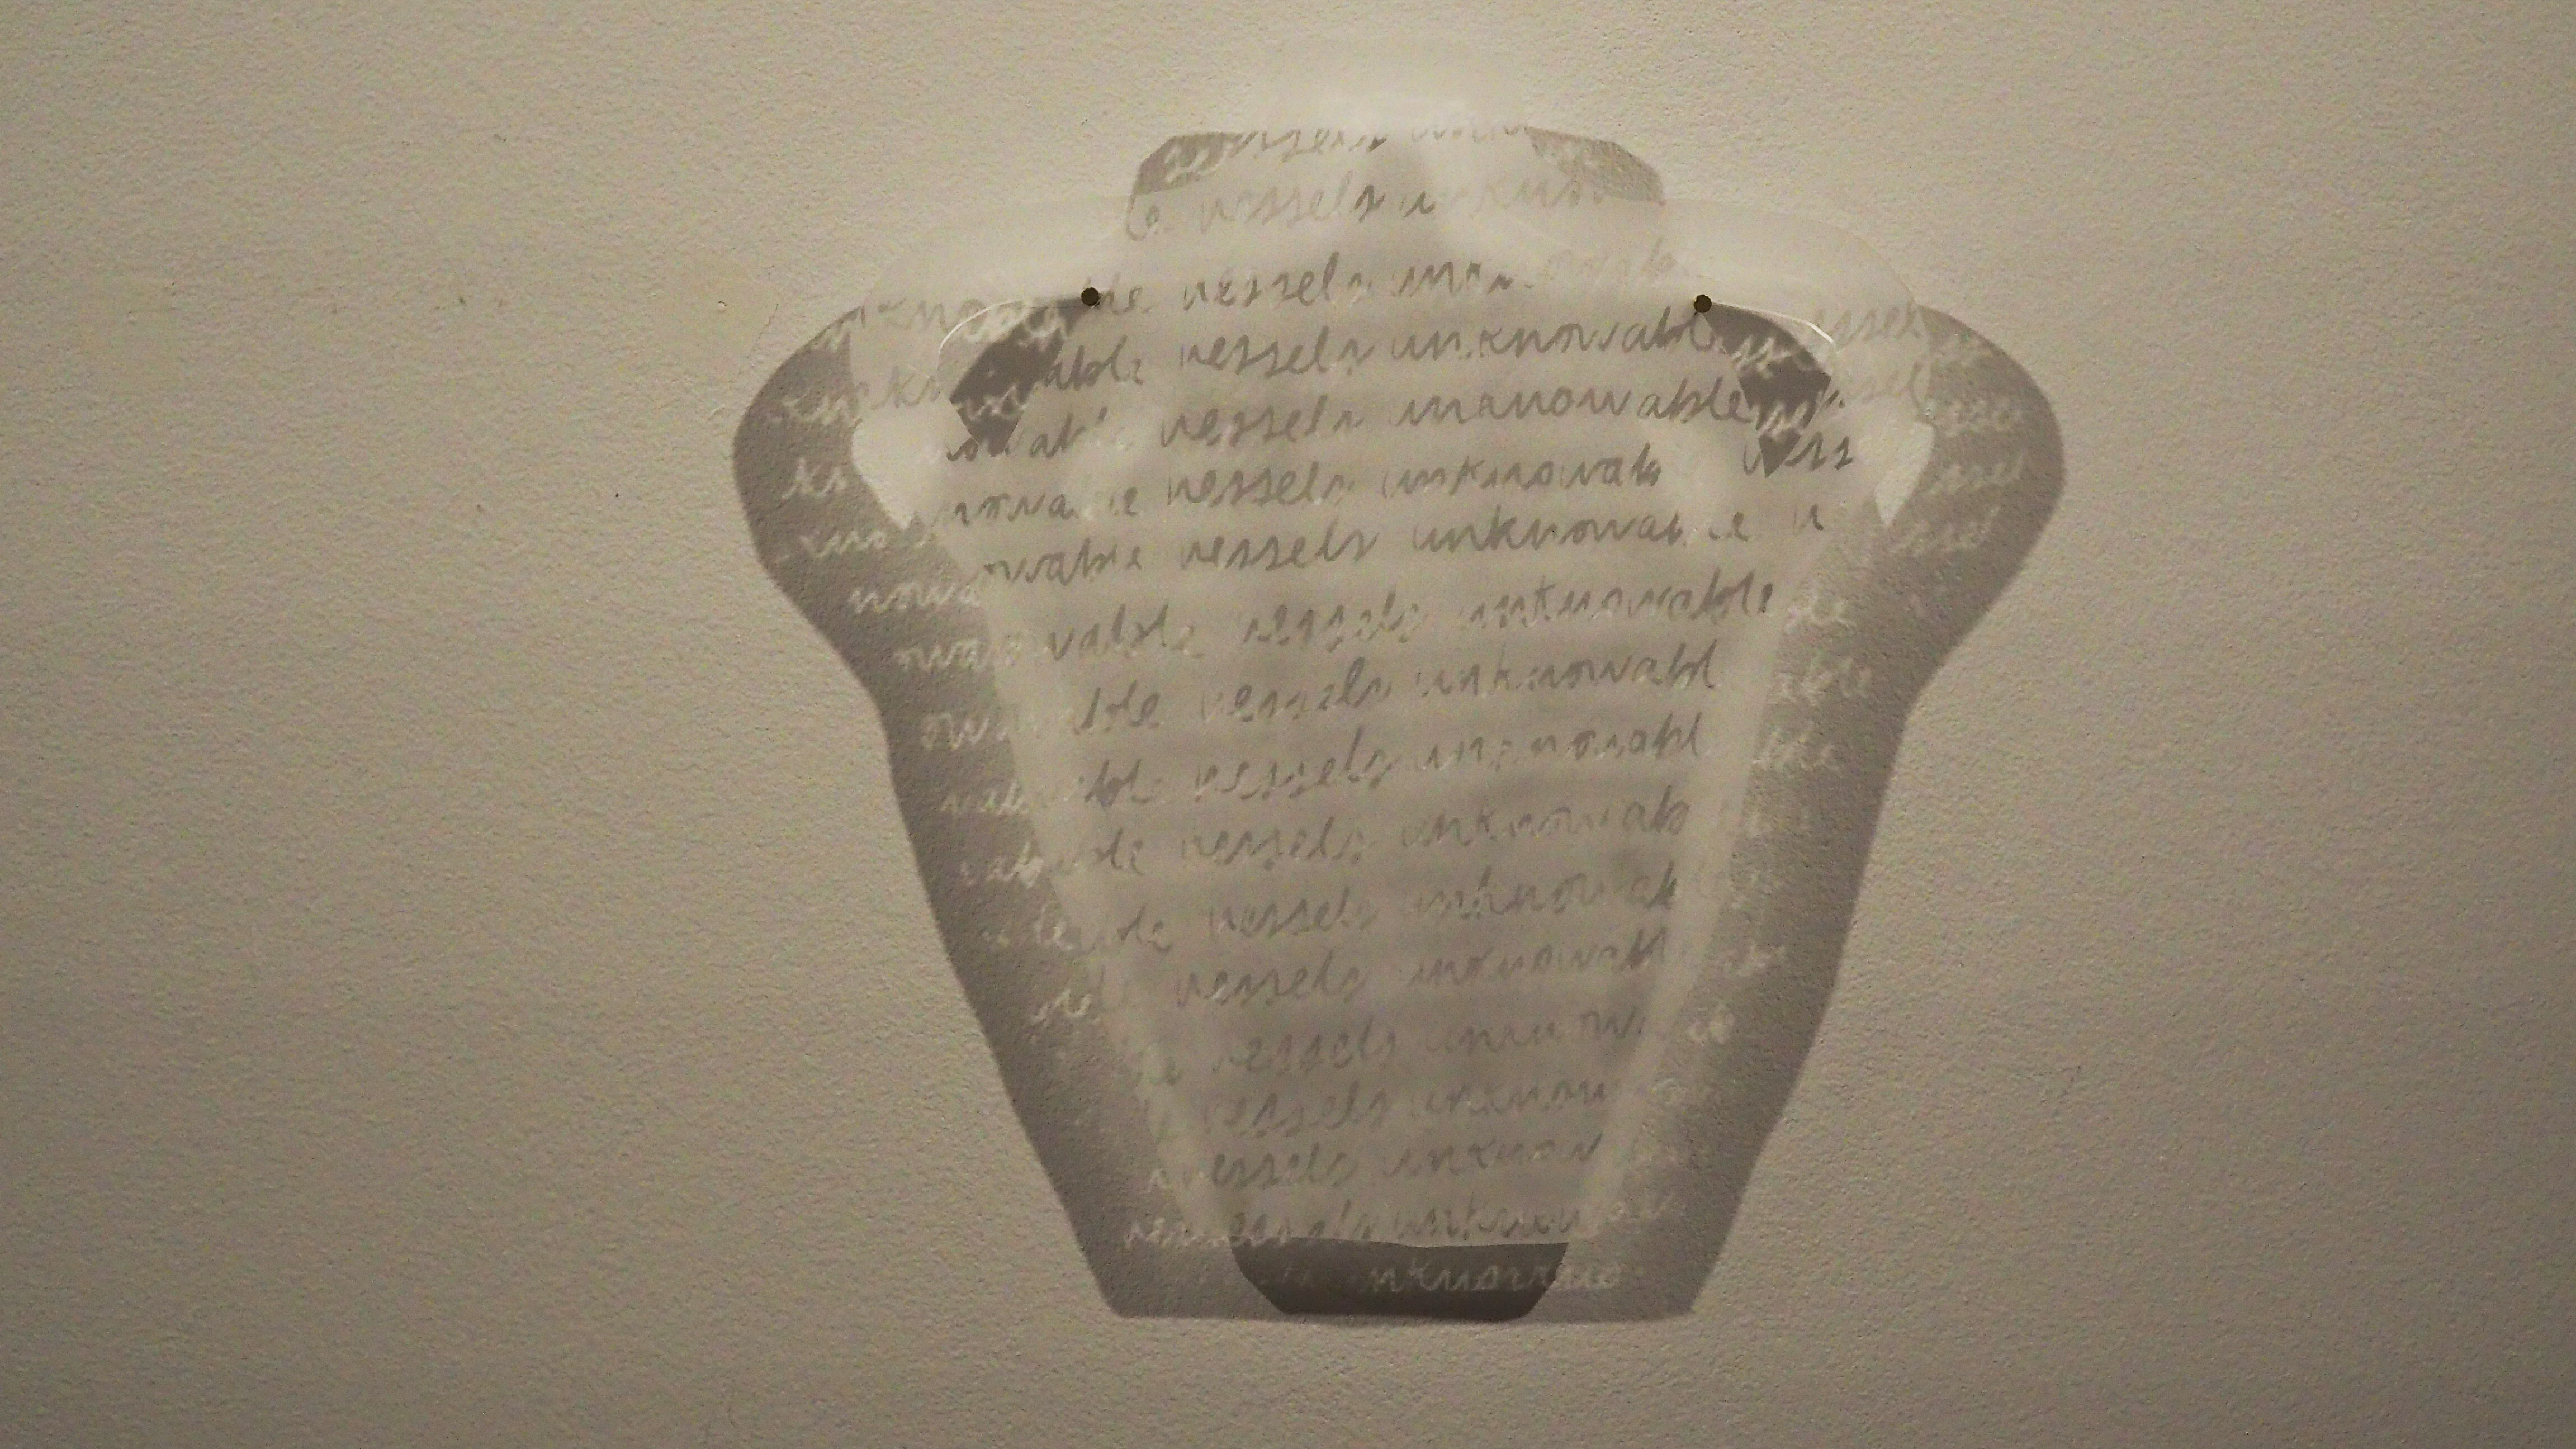 A wall-mounted acrylic plastic silhouette of a pot with cursive script on it that reads "vessels unknown"